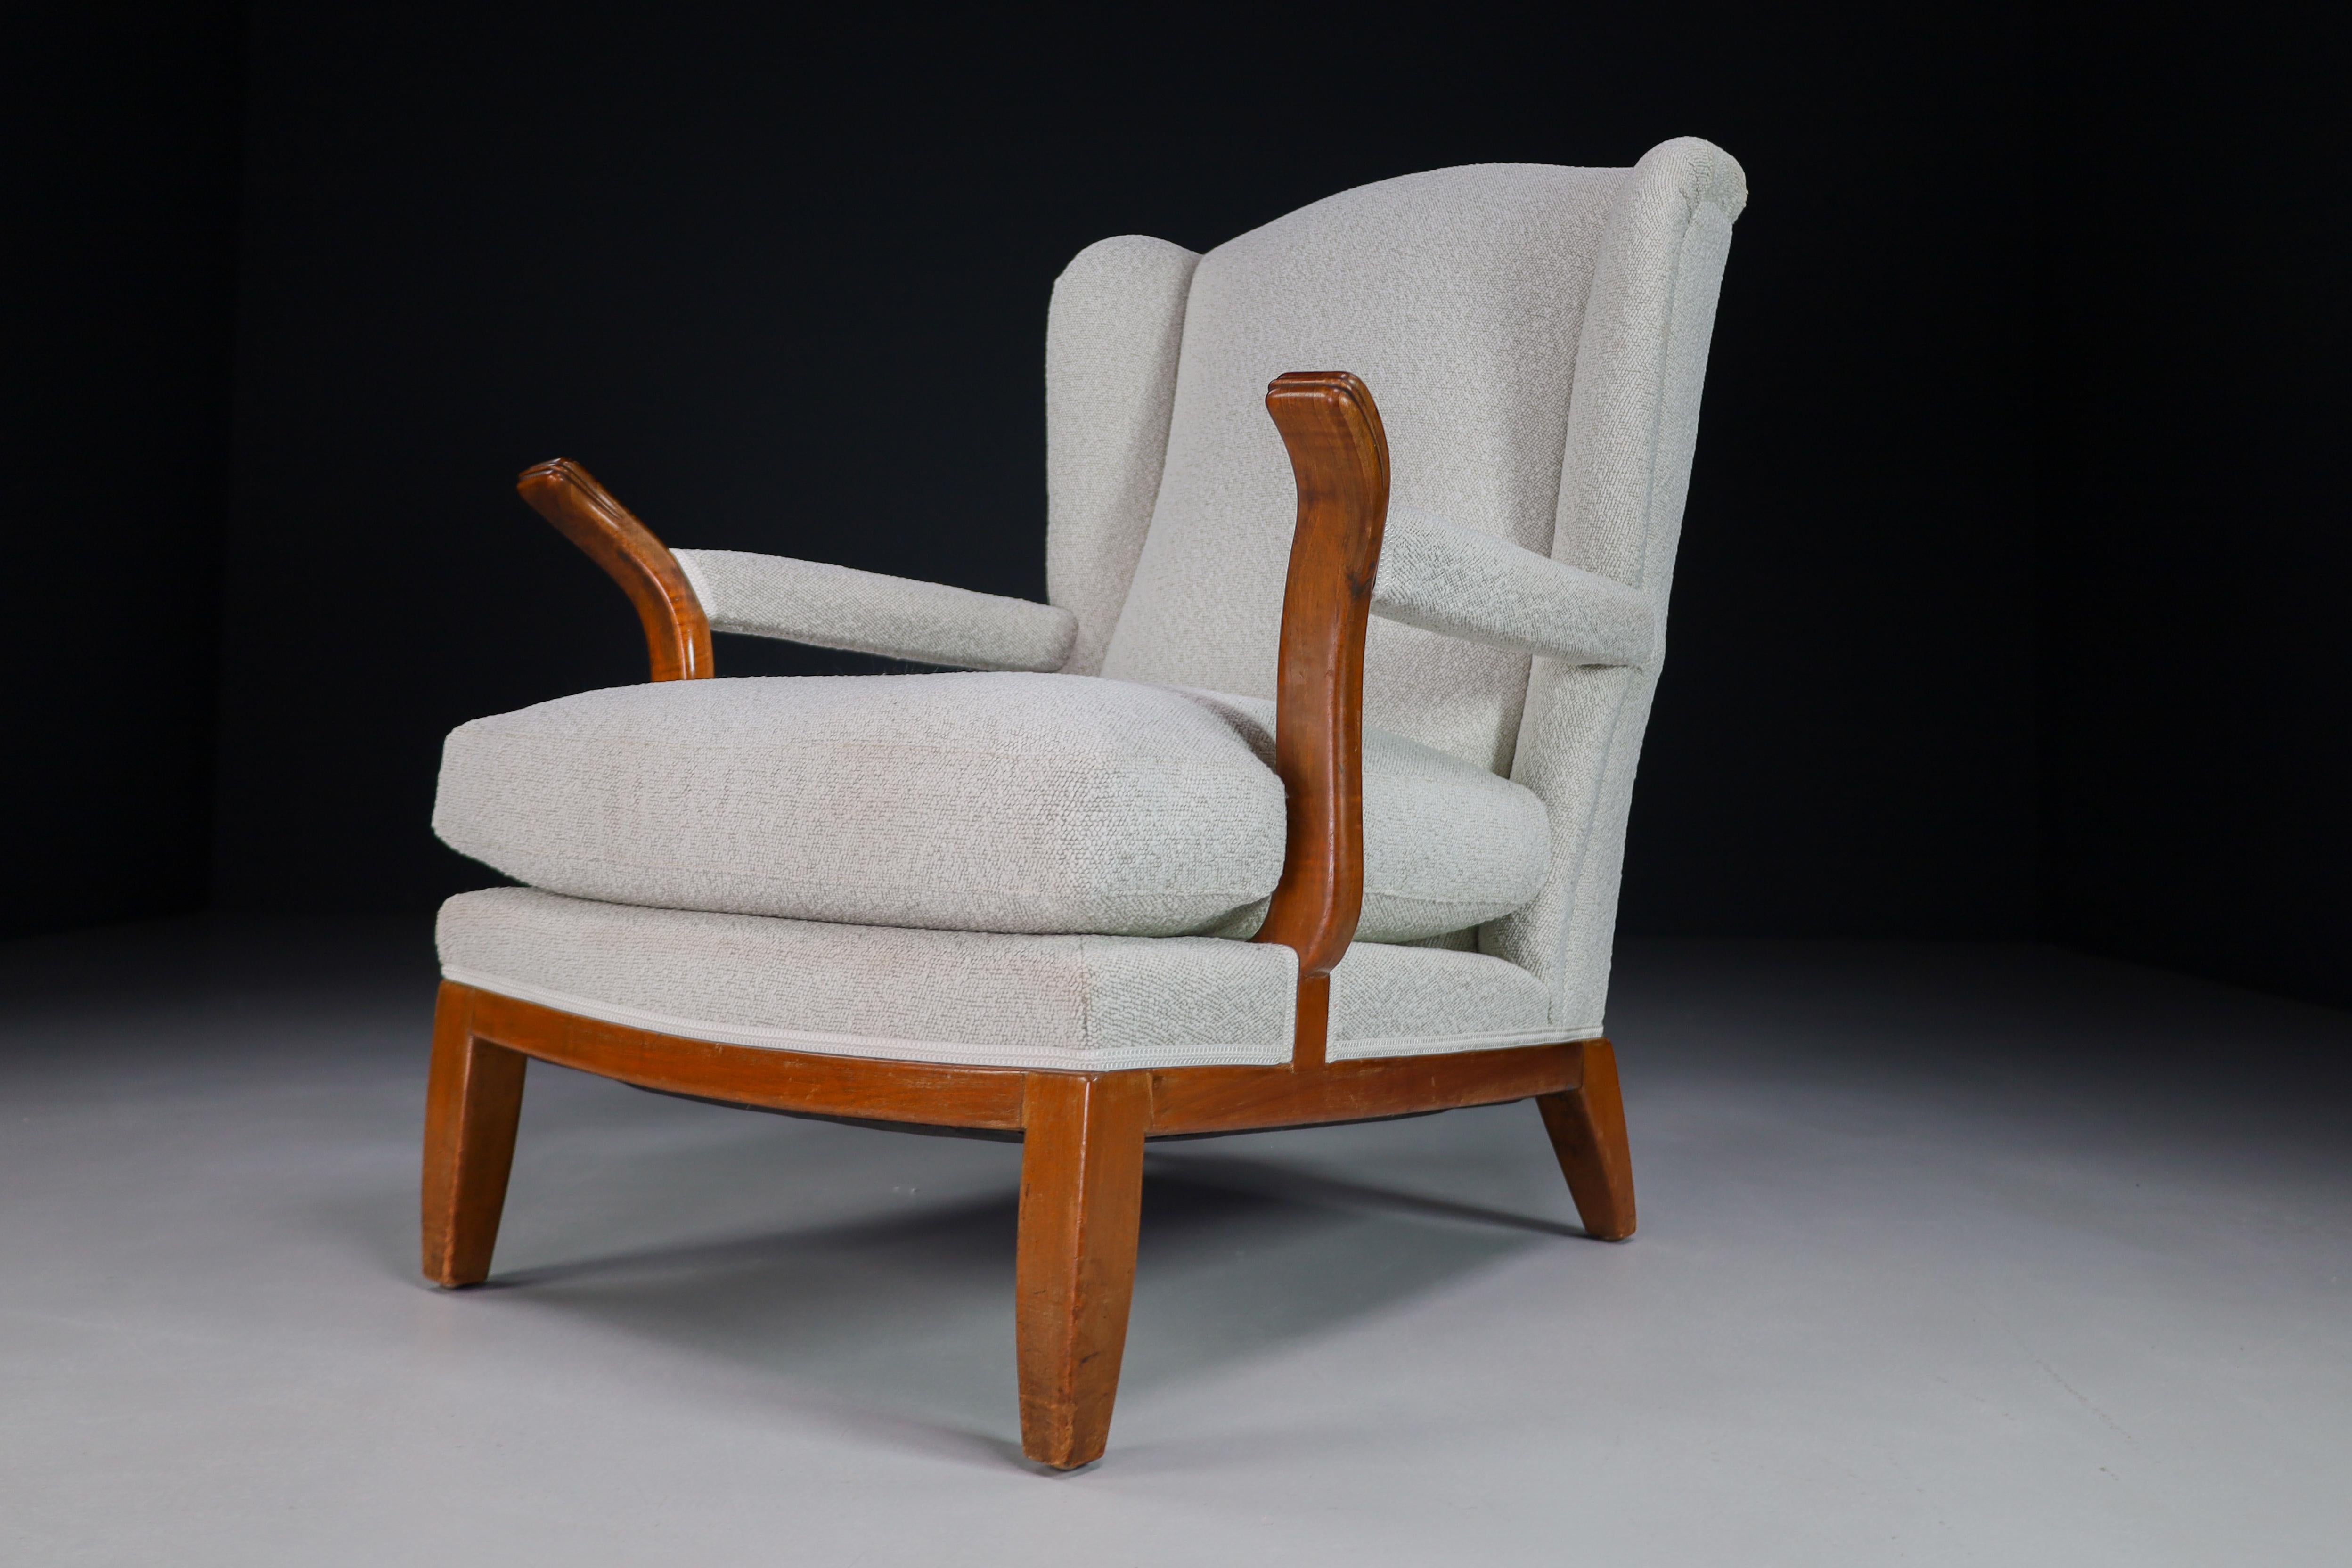 Large Wingback Chair in Walnut and New Bouclé Fabric, France, 1930s For Sale 7